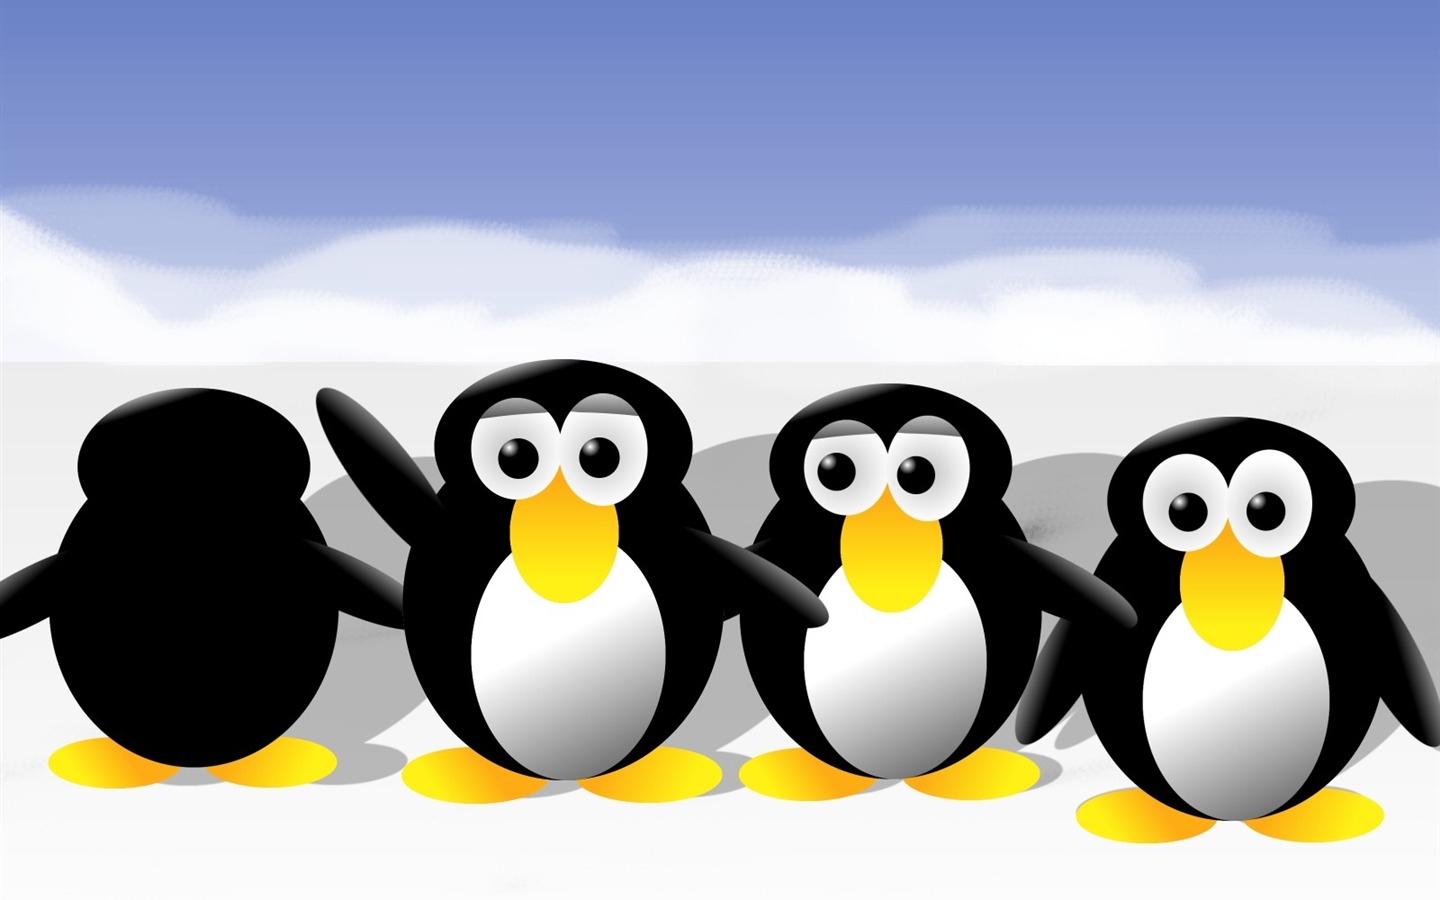 Linux tapety (1) #1 - 1440x900